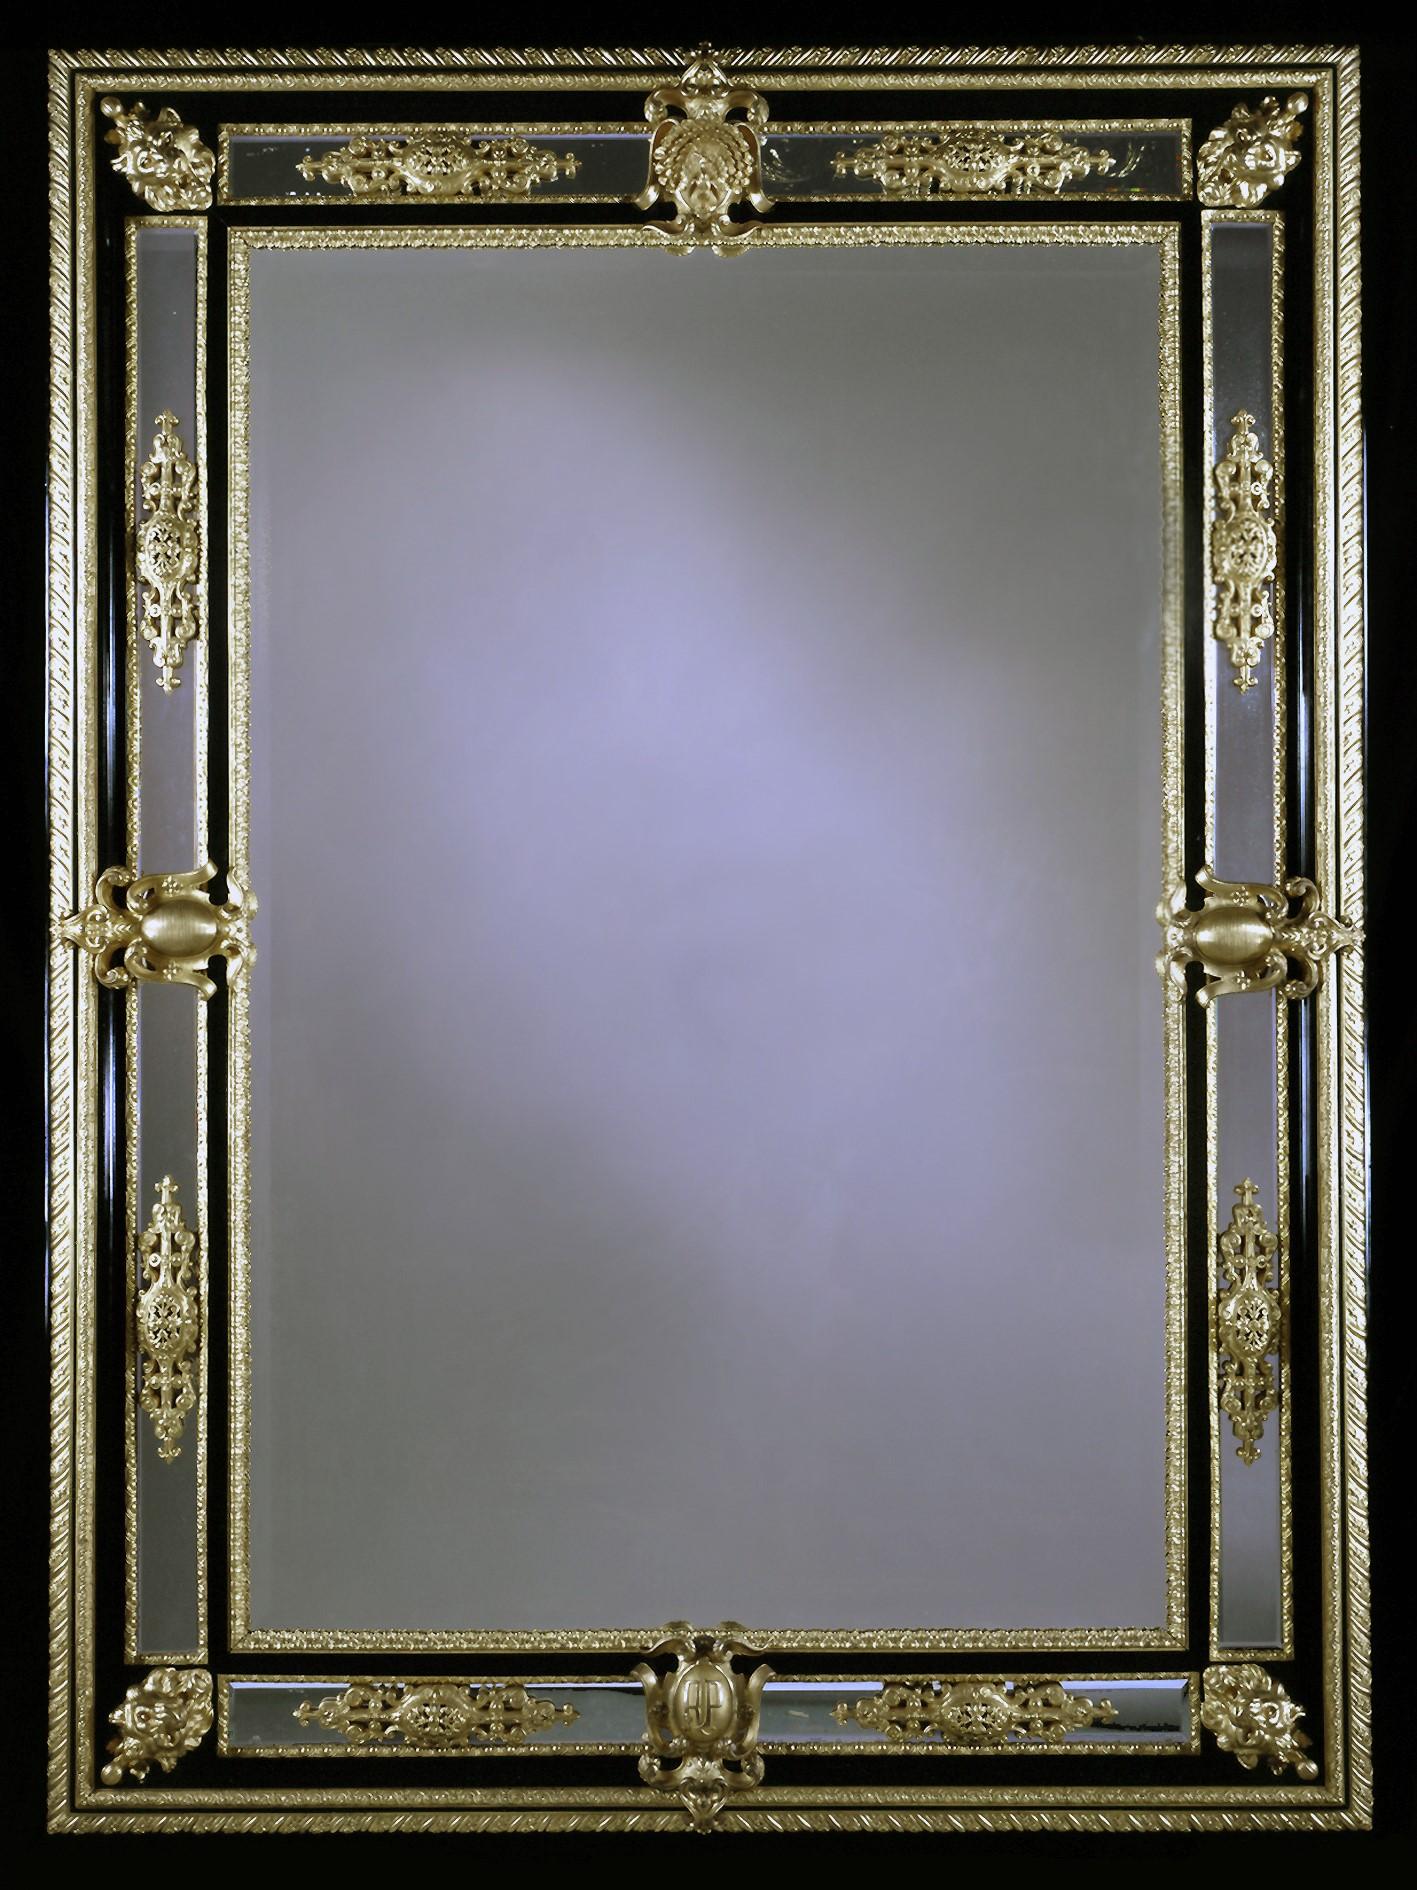 A fine and impressive Napoleon III gilt bronze and ebony bevelled mirror.

French, circa 1850.

A fine and impressive Napoleon III gilt bronze and ebony bevelled mirror with cast bronze lion masks mounted to the corners and cast peacock plaque